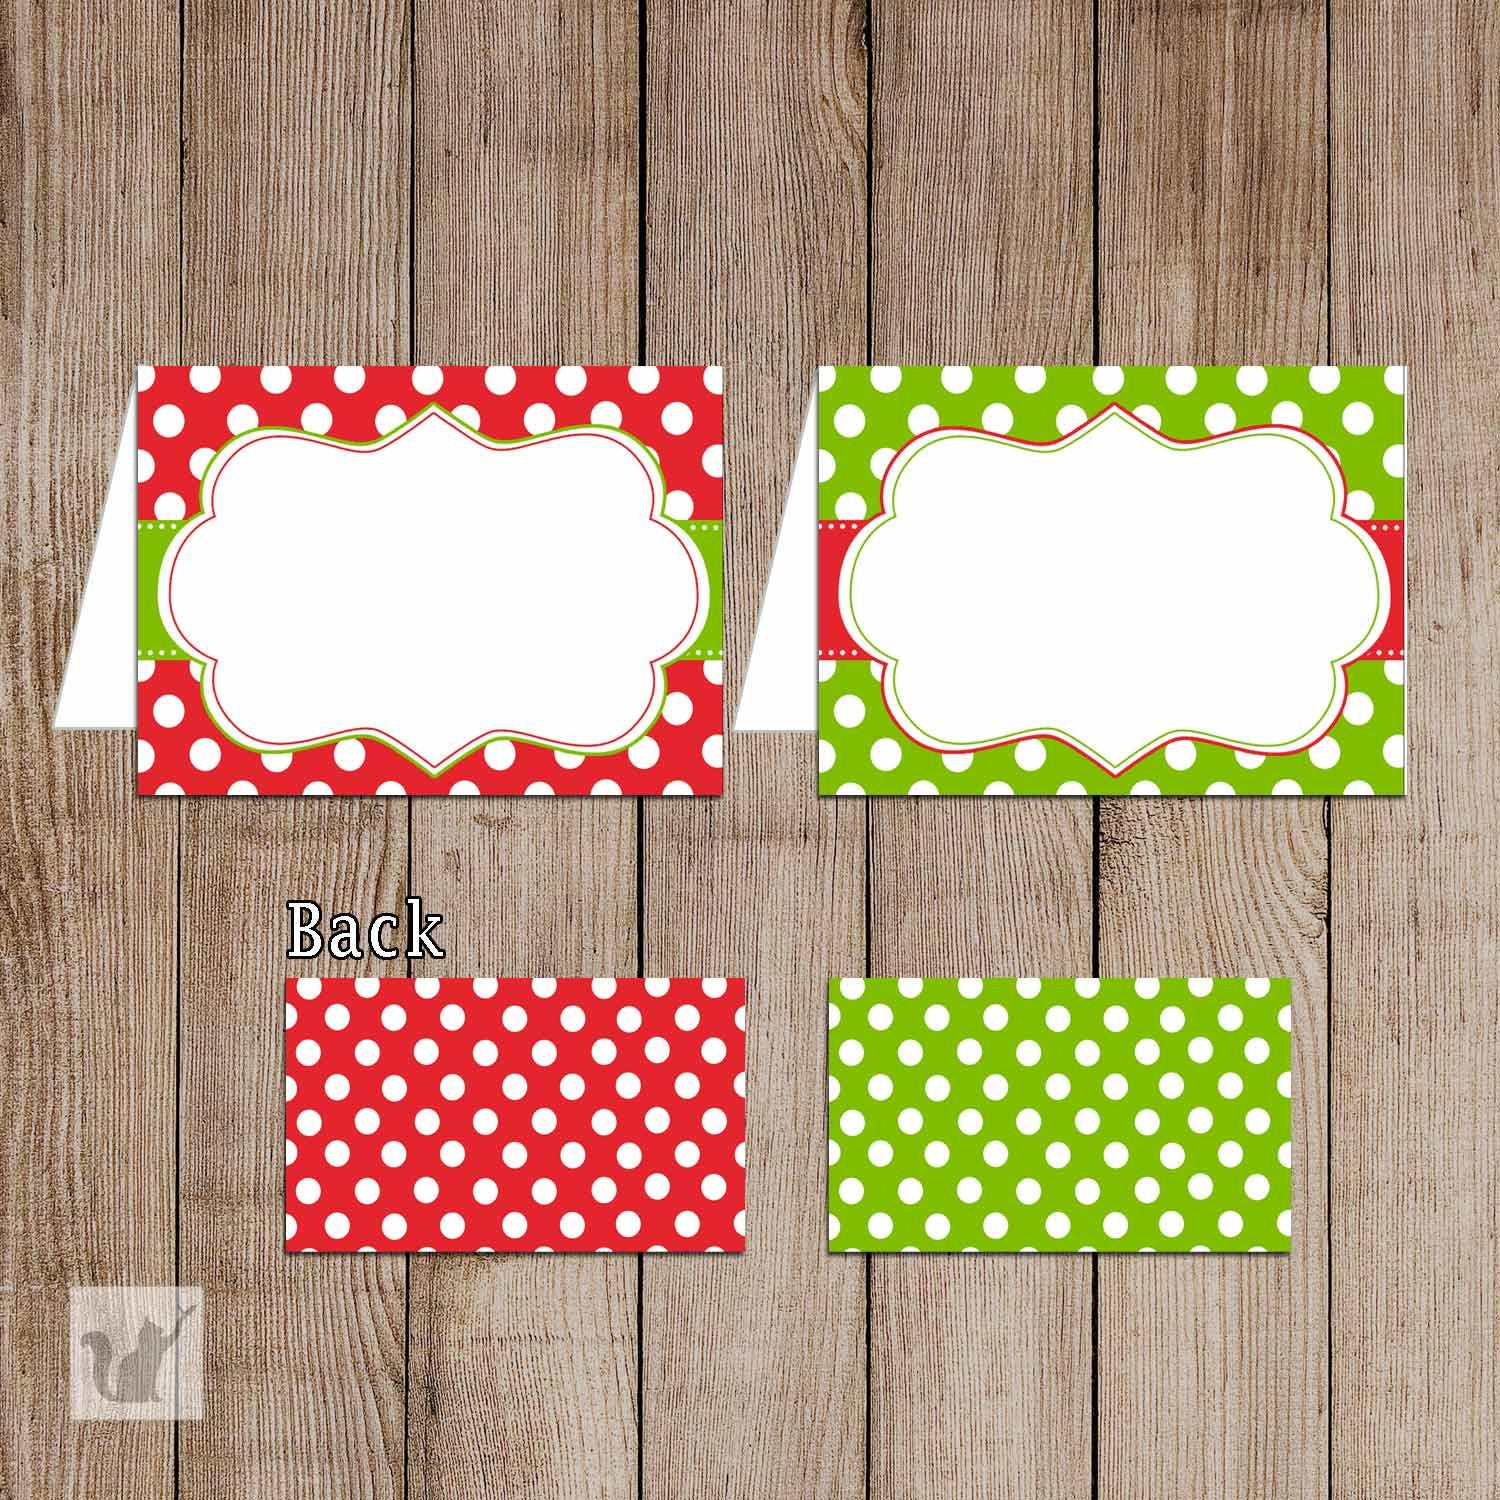 Printable Merry Christmas Folded Tent Card - Polka Dots Green Red Merry Xmas Gift Favor Printable New Year Decoration Editable File ID